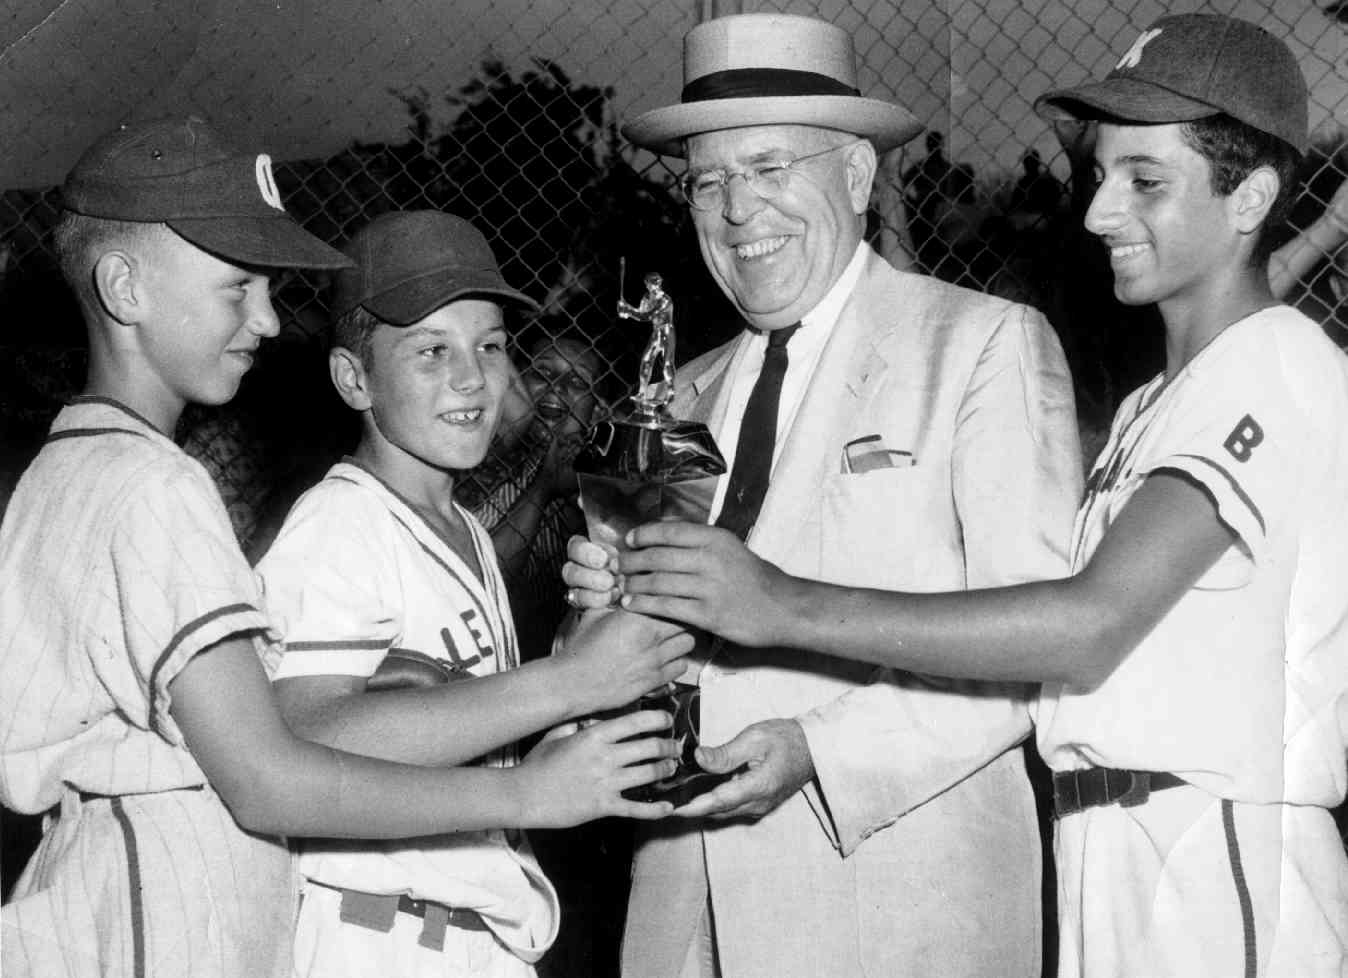 Mayor David Lawrence celebrates Brookline's victory
in the District 5 championship game of the Little League
World Series in 1958. Pictured with the mayor are Jack
Flavin, Jack Wertz and Fred Luvara